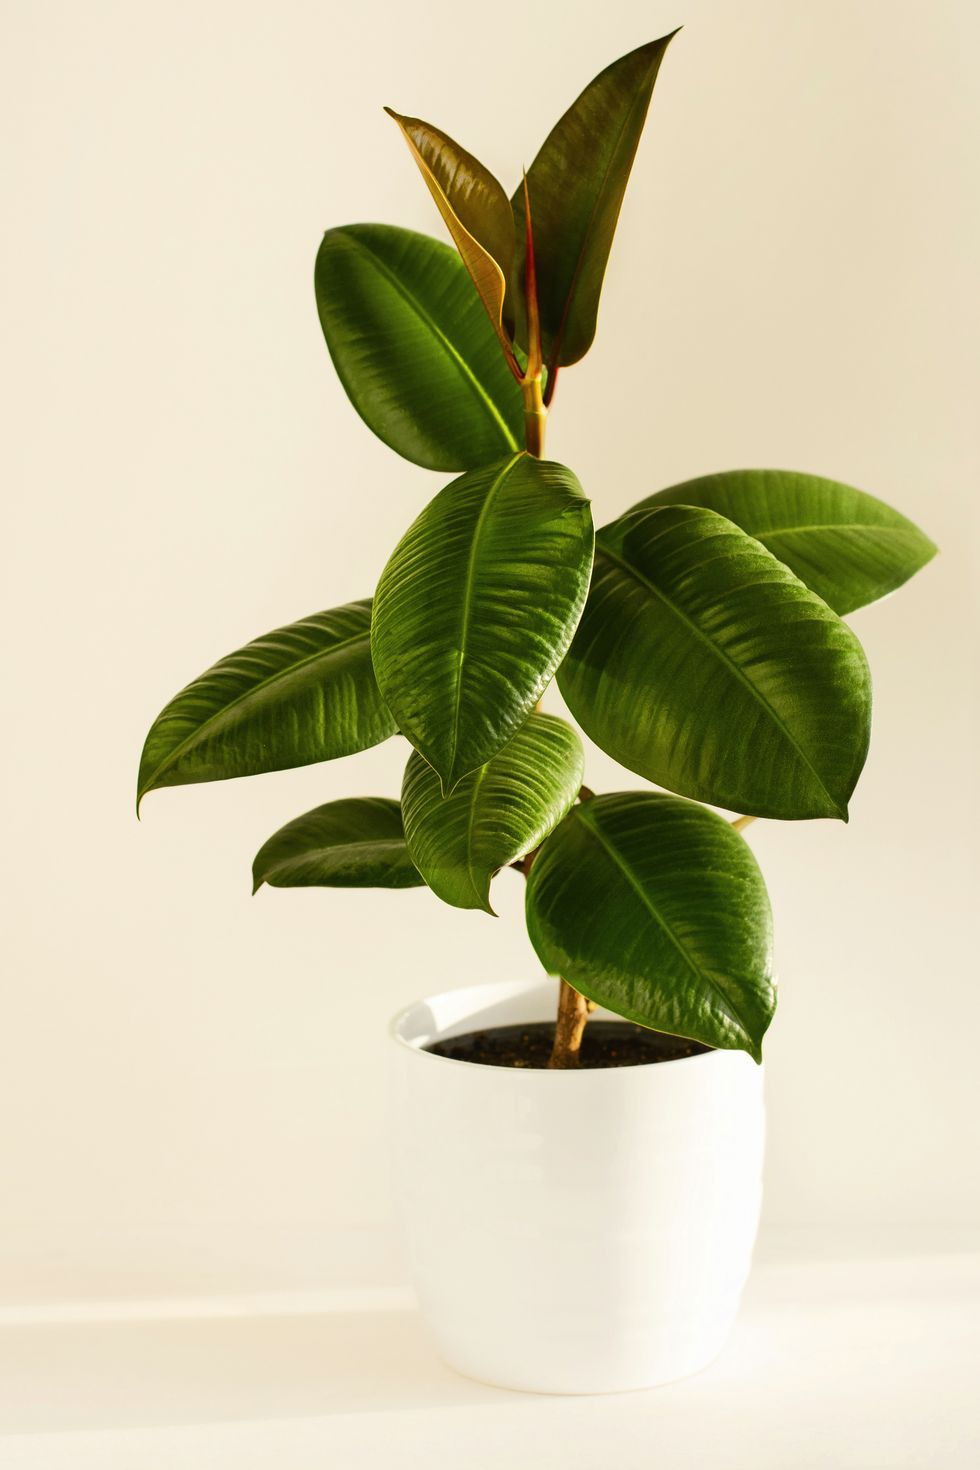 home plant in white flowerpot, young plant of ficus elastica plant on a light background close up vertical crop copy space